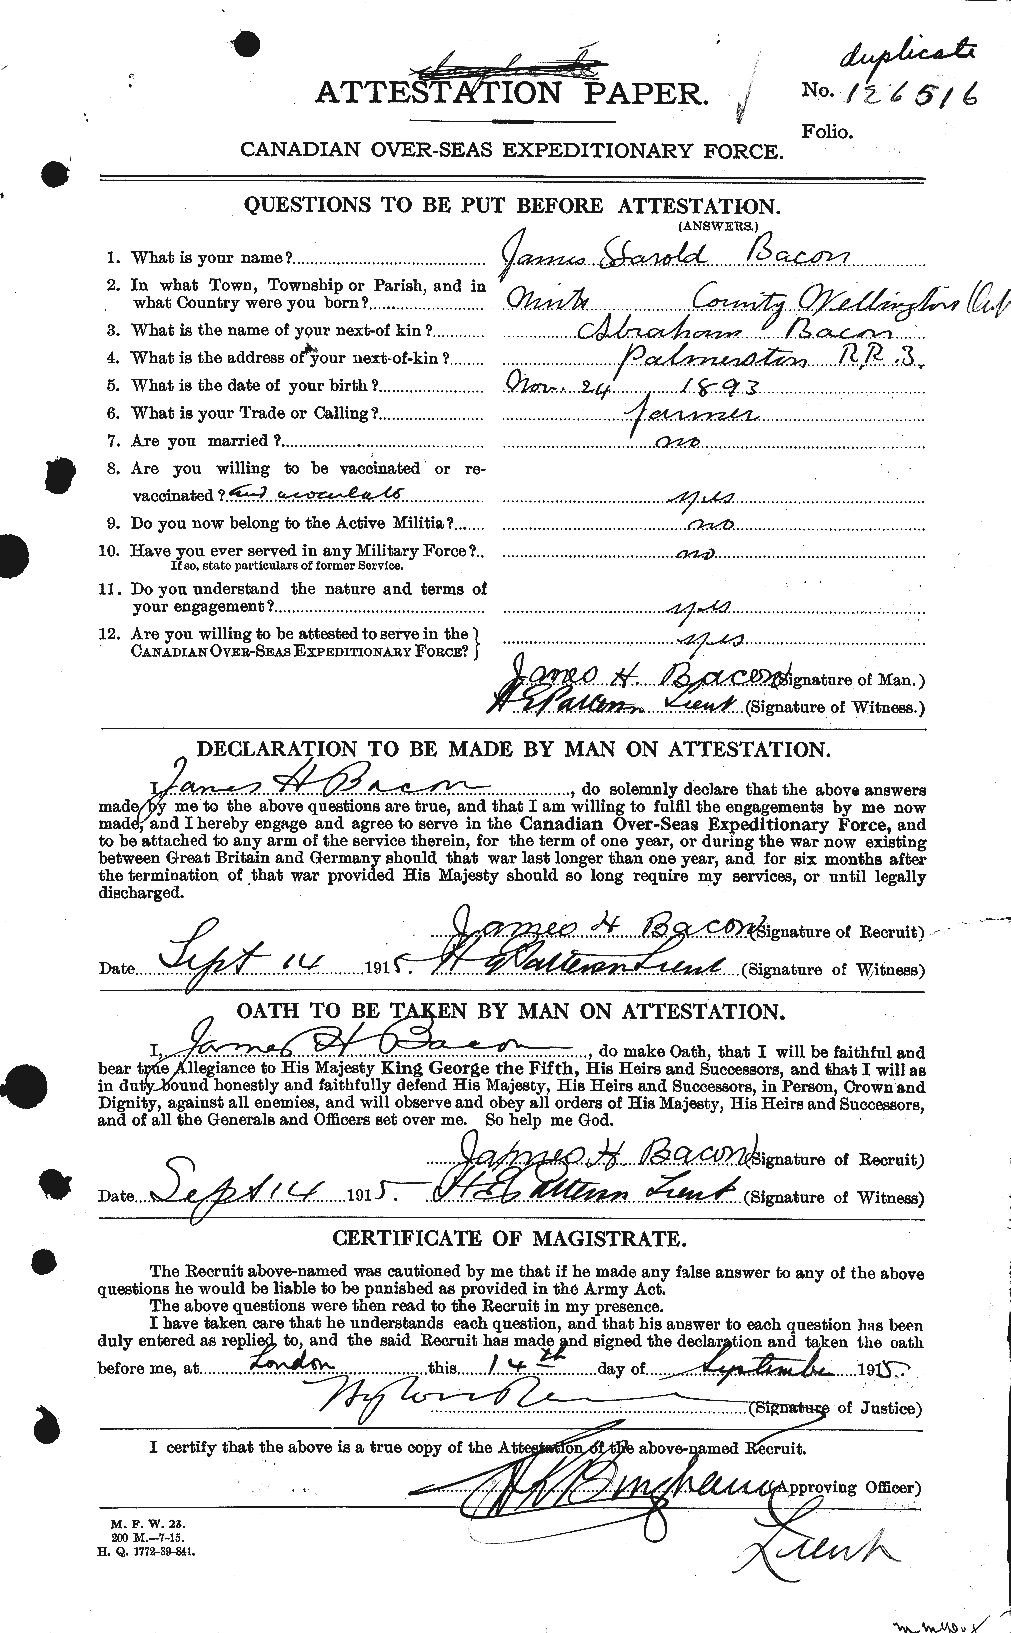 Personnel Records of the First World War - CEF 217878a